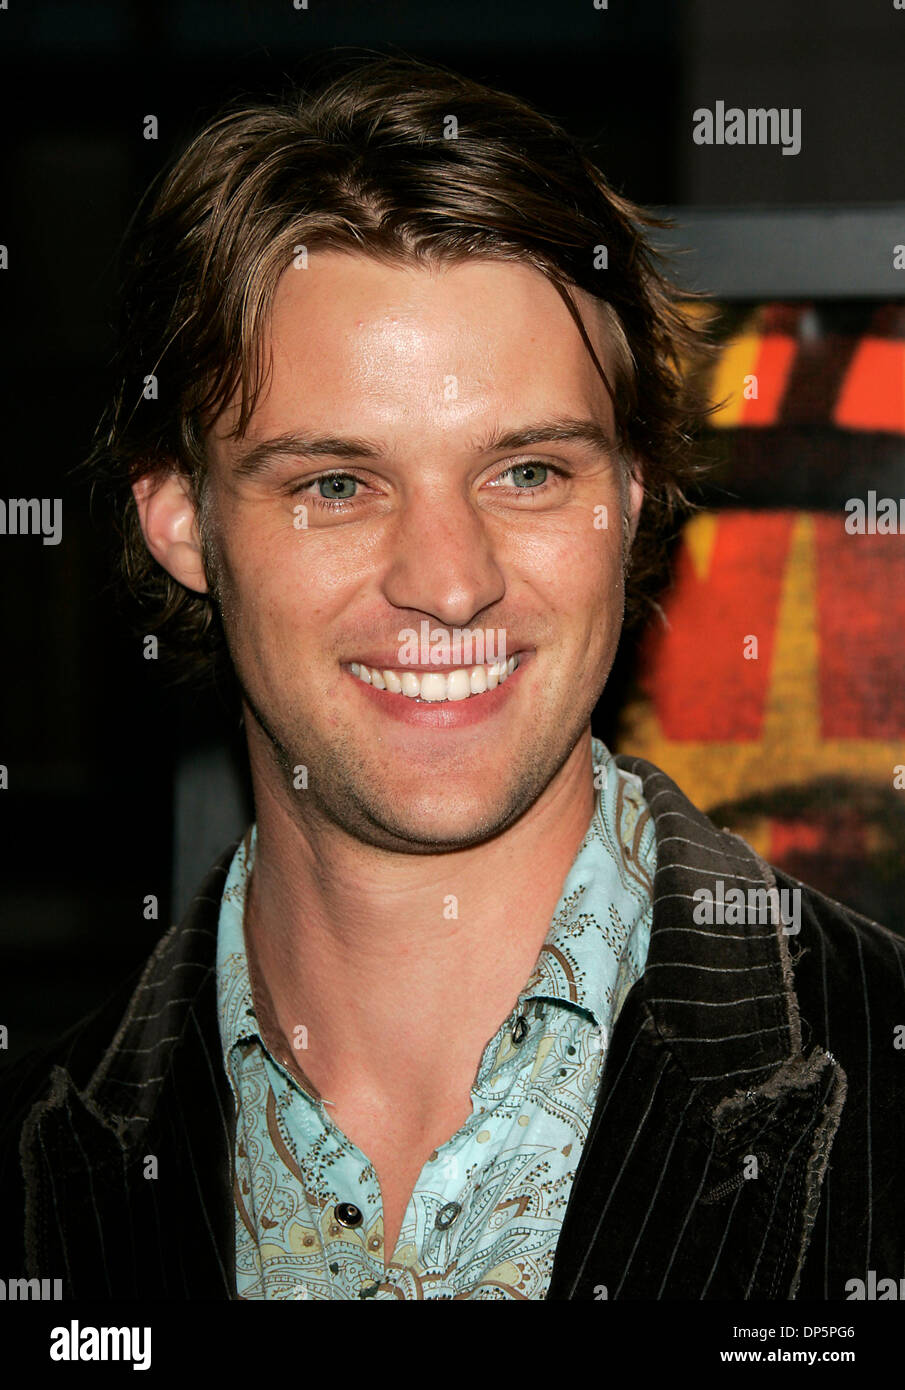 Sep 21, 2006; Beverly Hills, California, USA; Actor JESSE SPENCER at 'The Last King Of Scotland' Los Angeles Premiere held at the Academy of Motions Pictures Theatre. Mandatory Credit: Photo by Lisa O'Connor/ZUMA Press. (©) Copyright 2006 by Lisa O'Connor Stock Photo